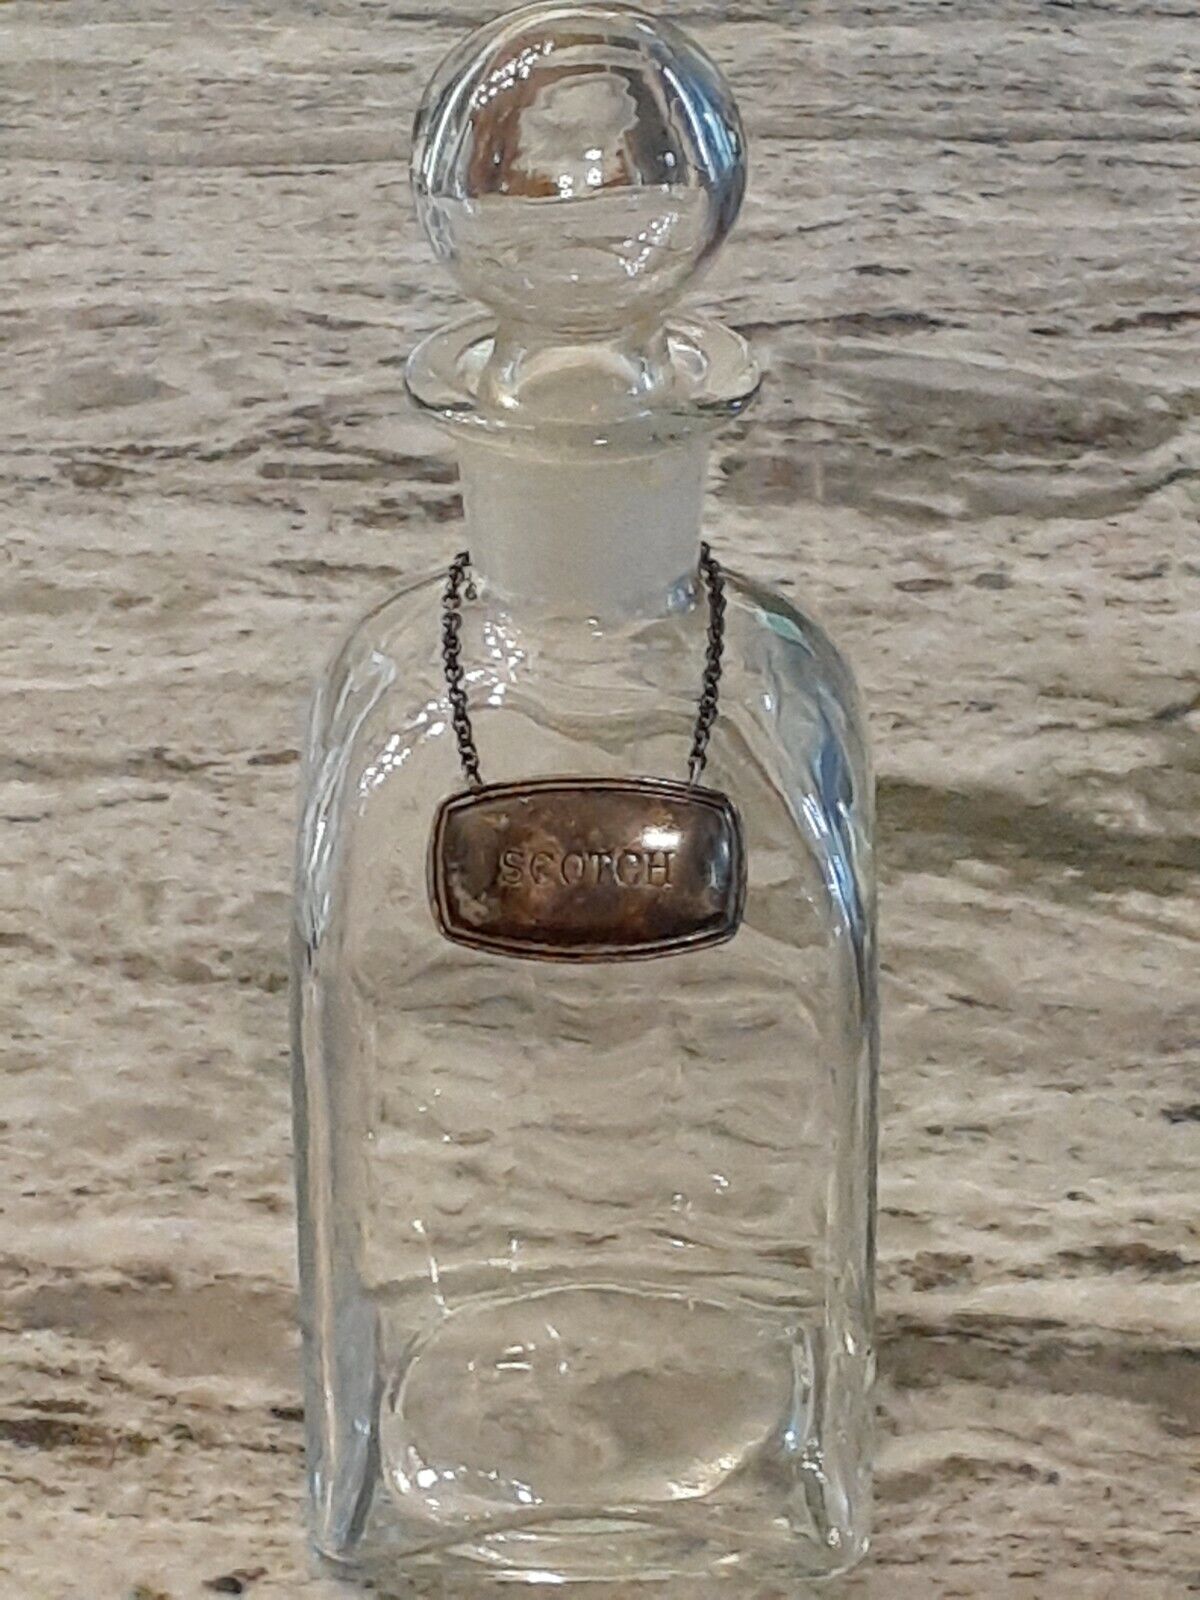 GREAT Antique SCOTCH Liquor DECANTER w/ ENGLISH SILVERPLATE Engraved TAG-Stopper